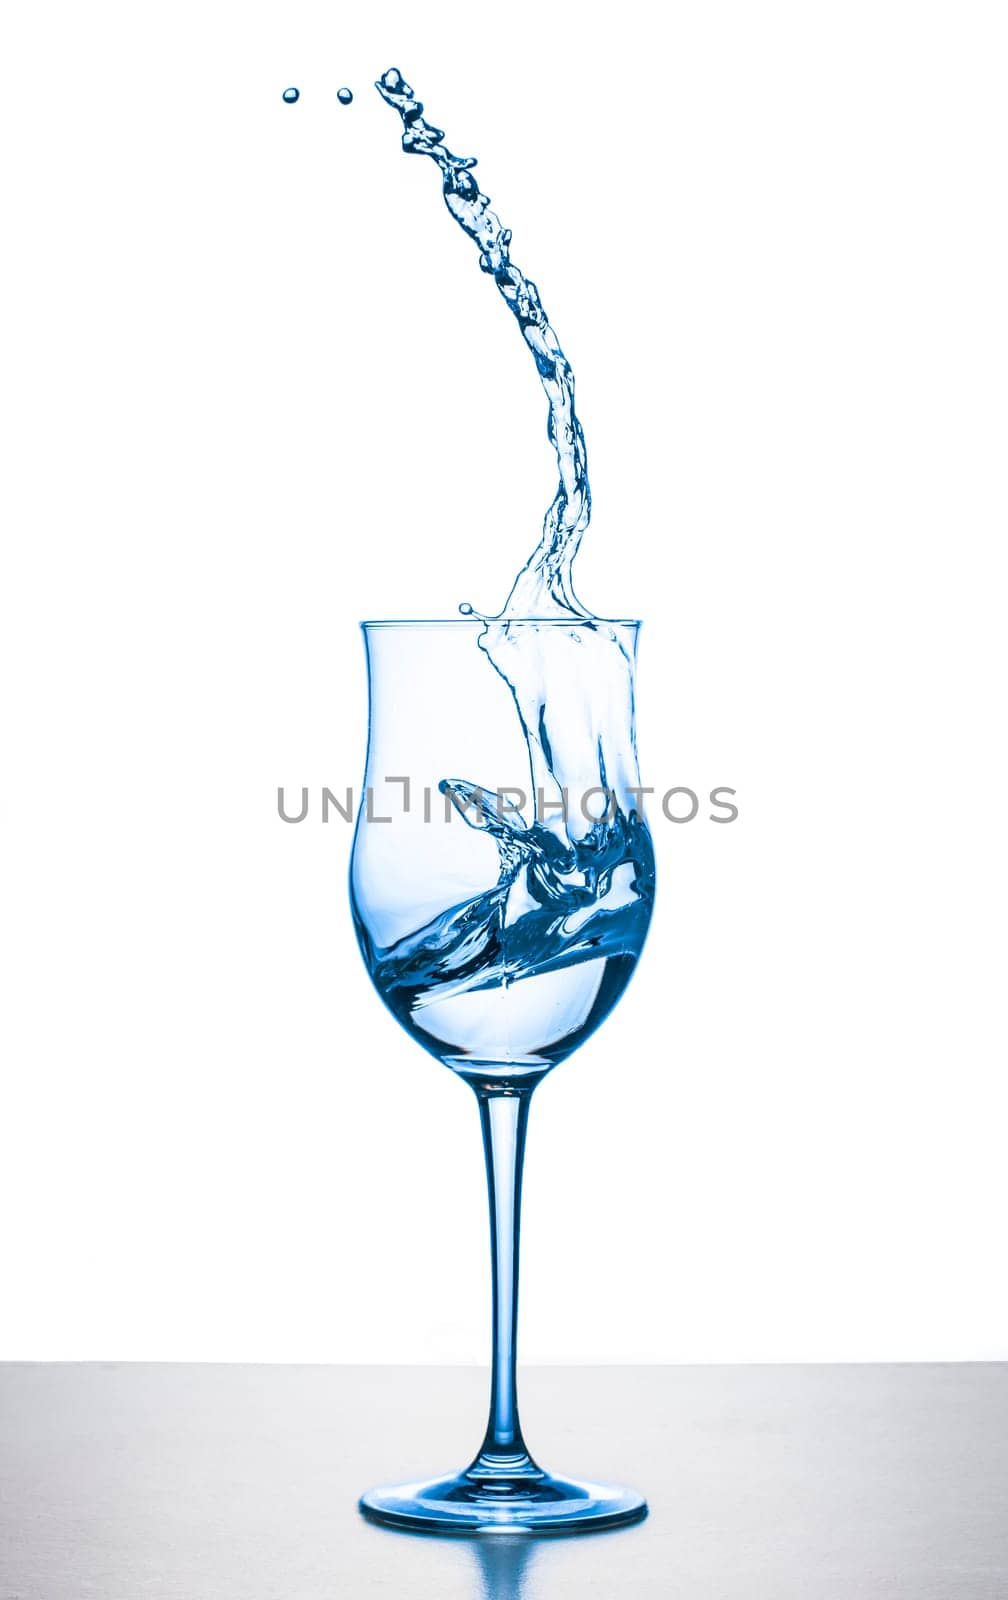 water splashing from glass on white background by fascinadora